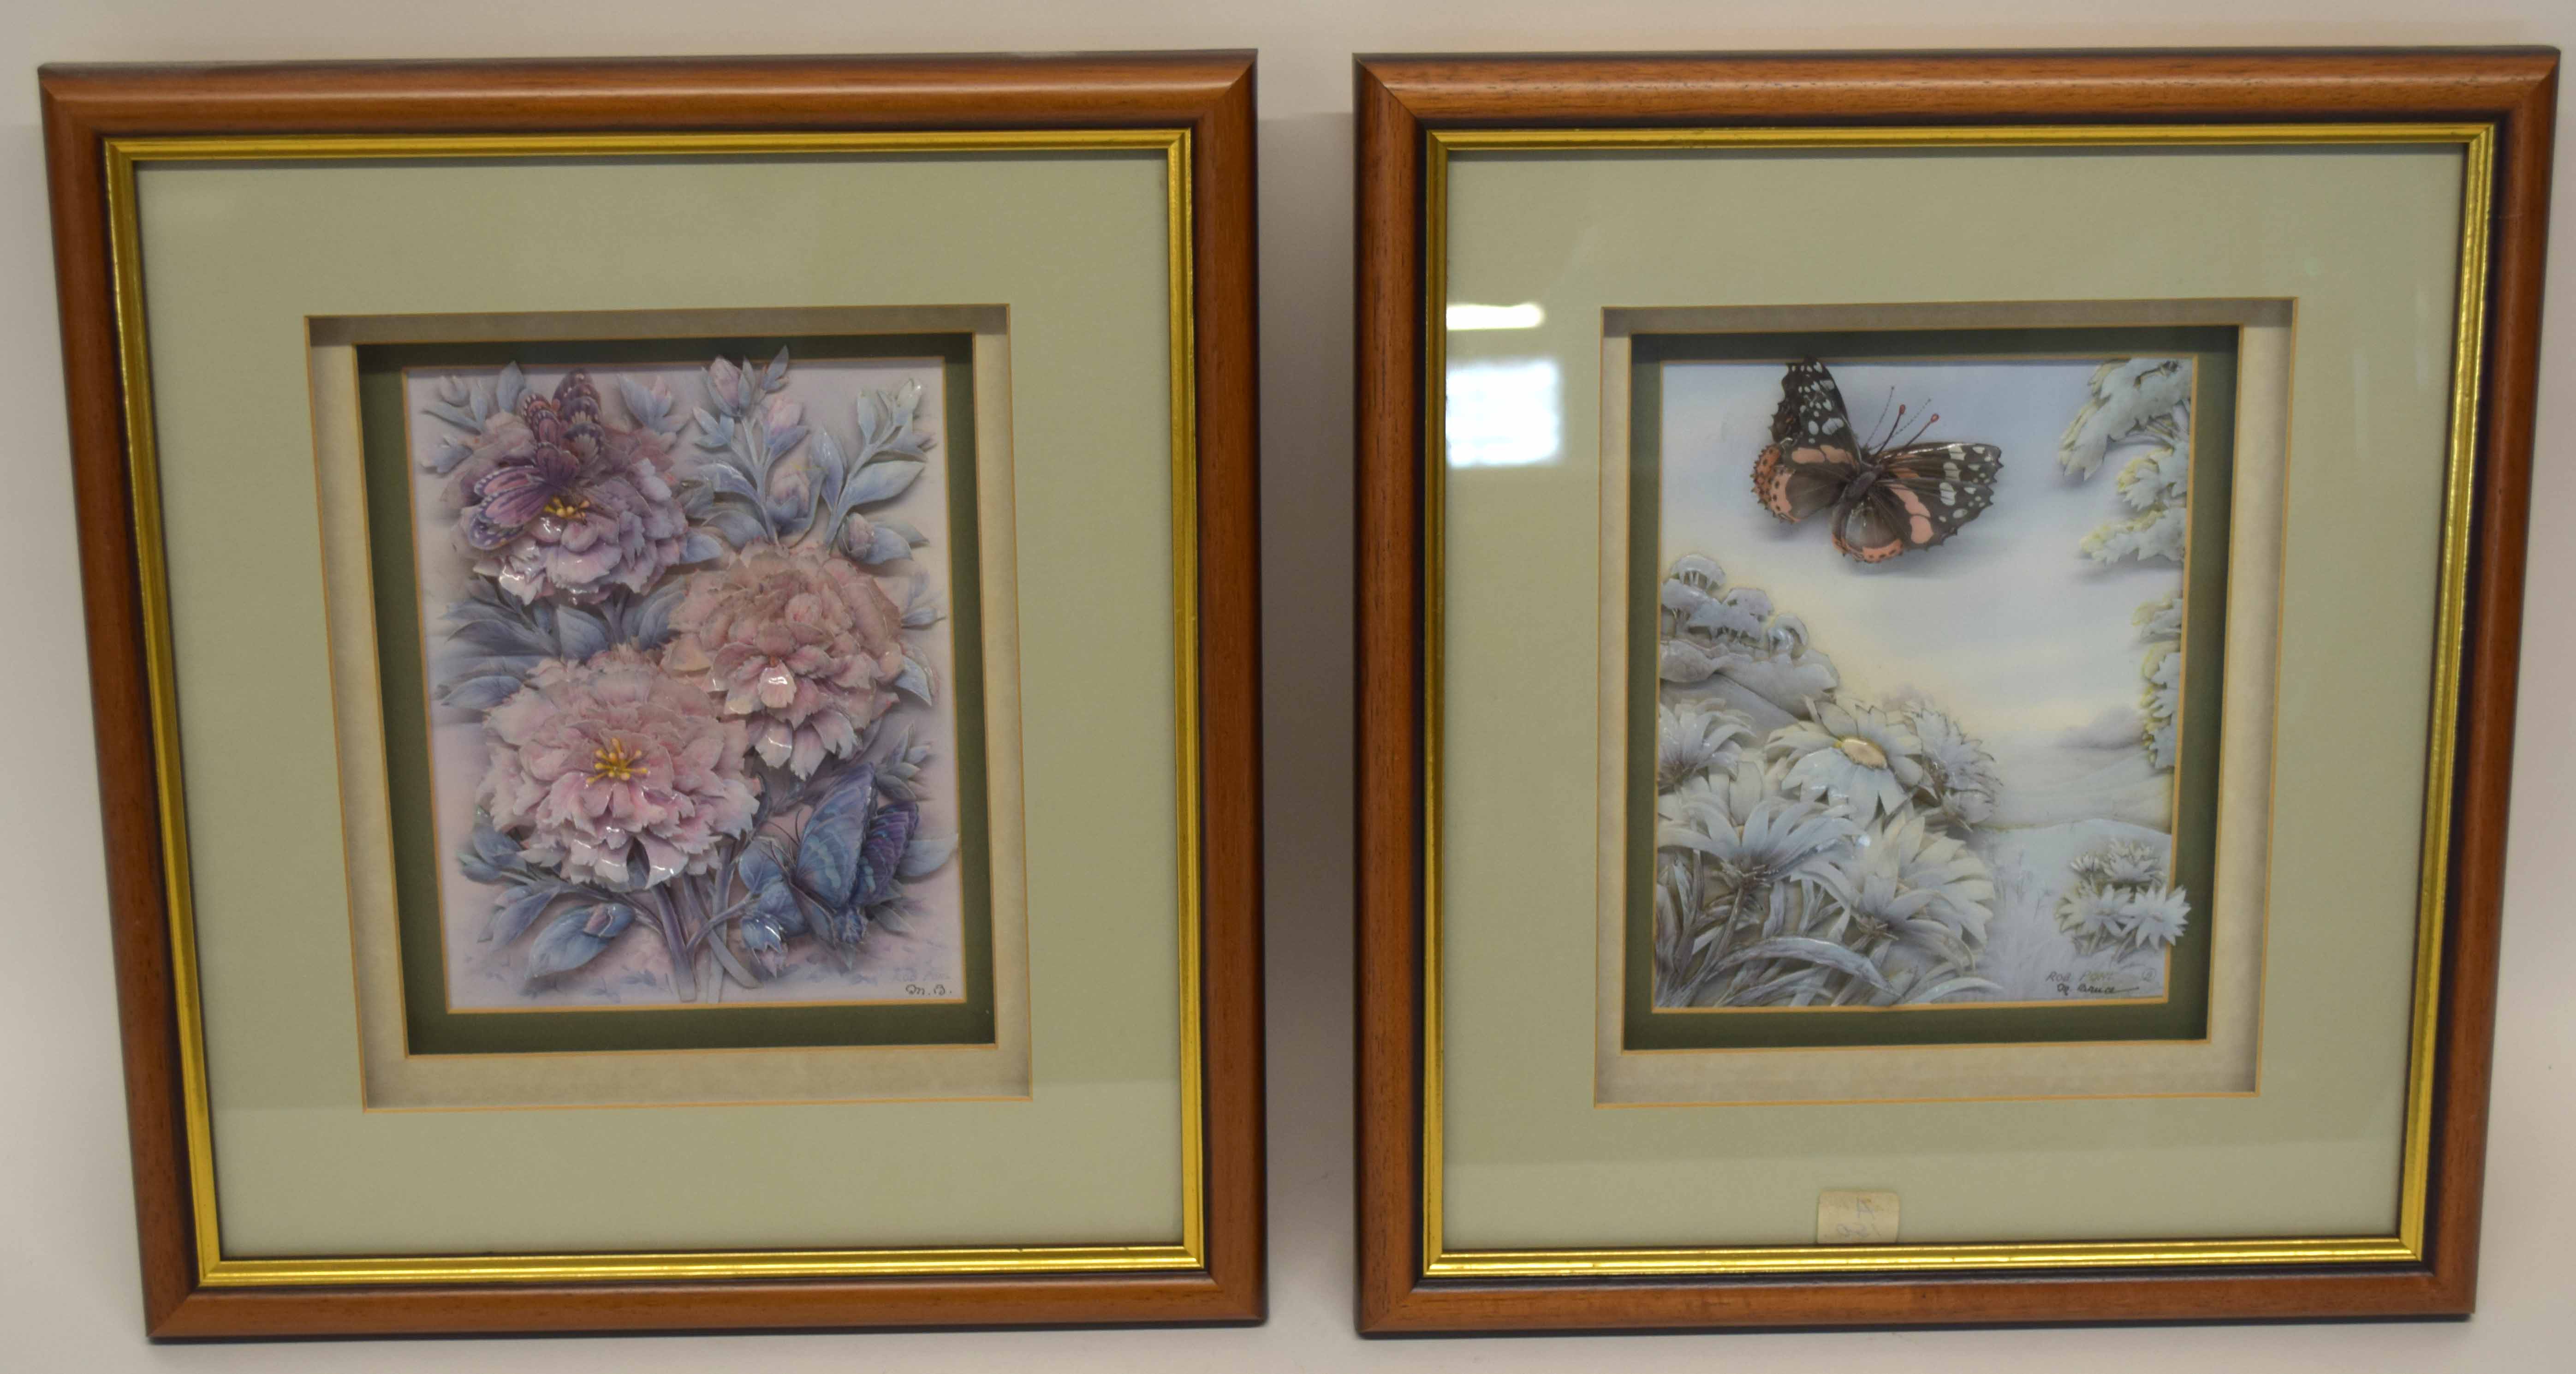 Two framed pictures, one of porcelain flowers in relief, the other of butterfly and foliage, both in